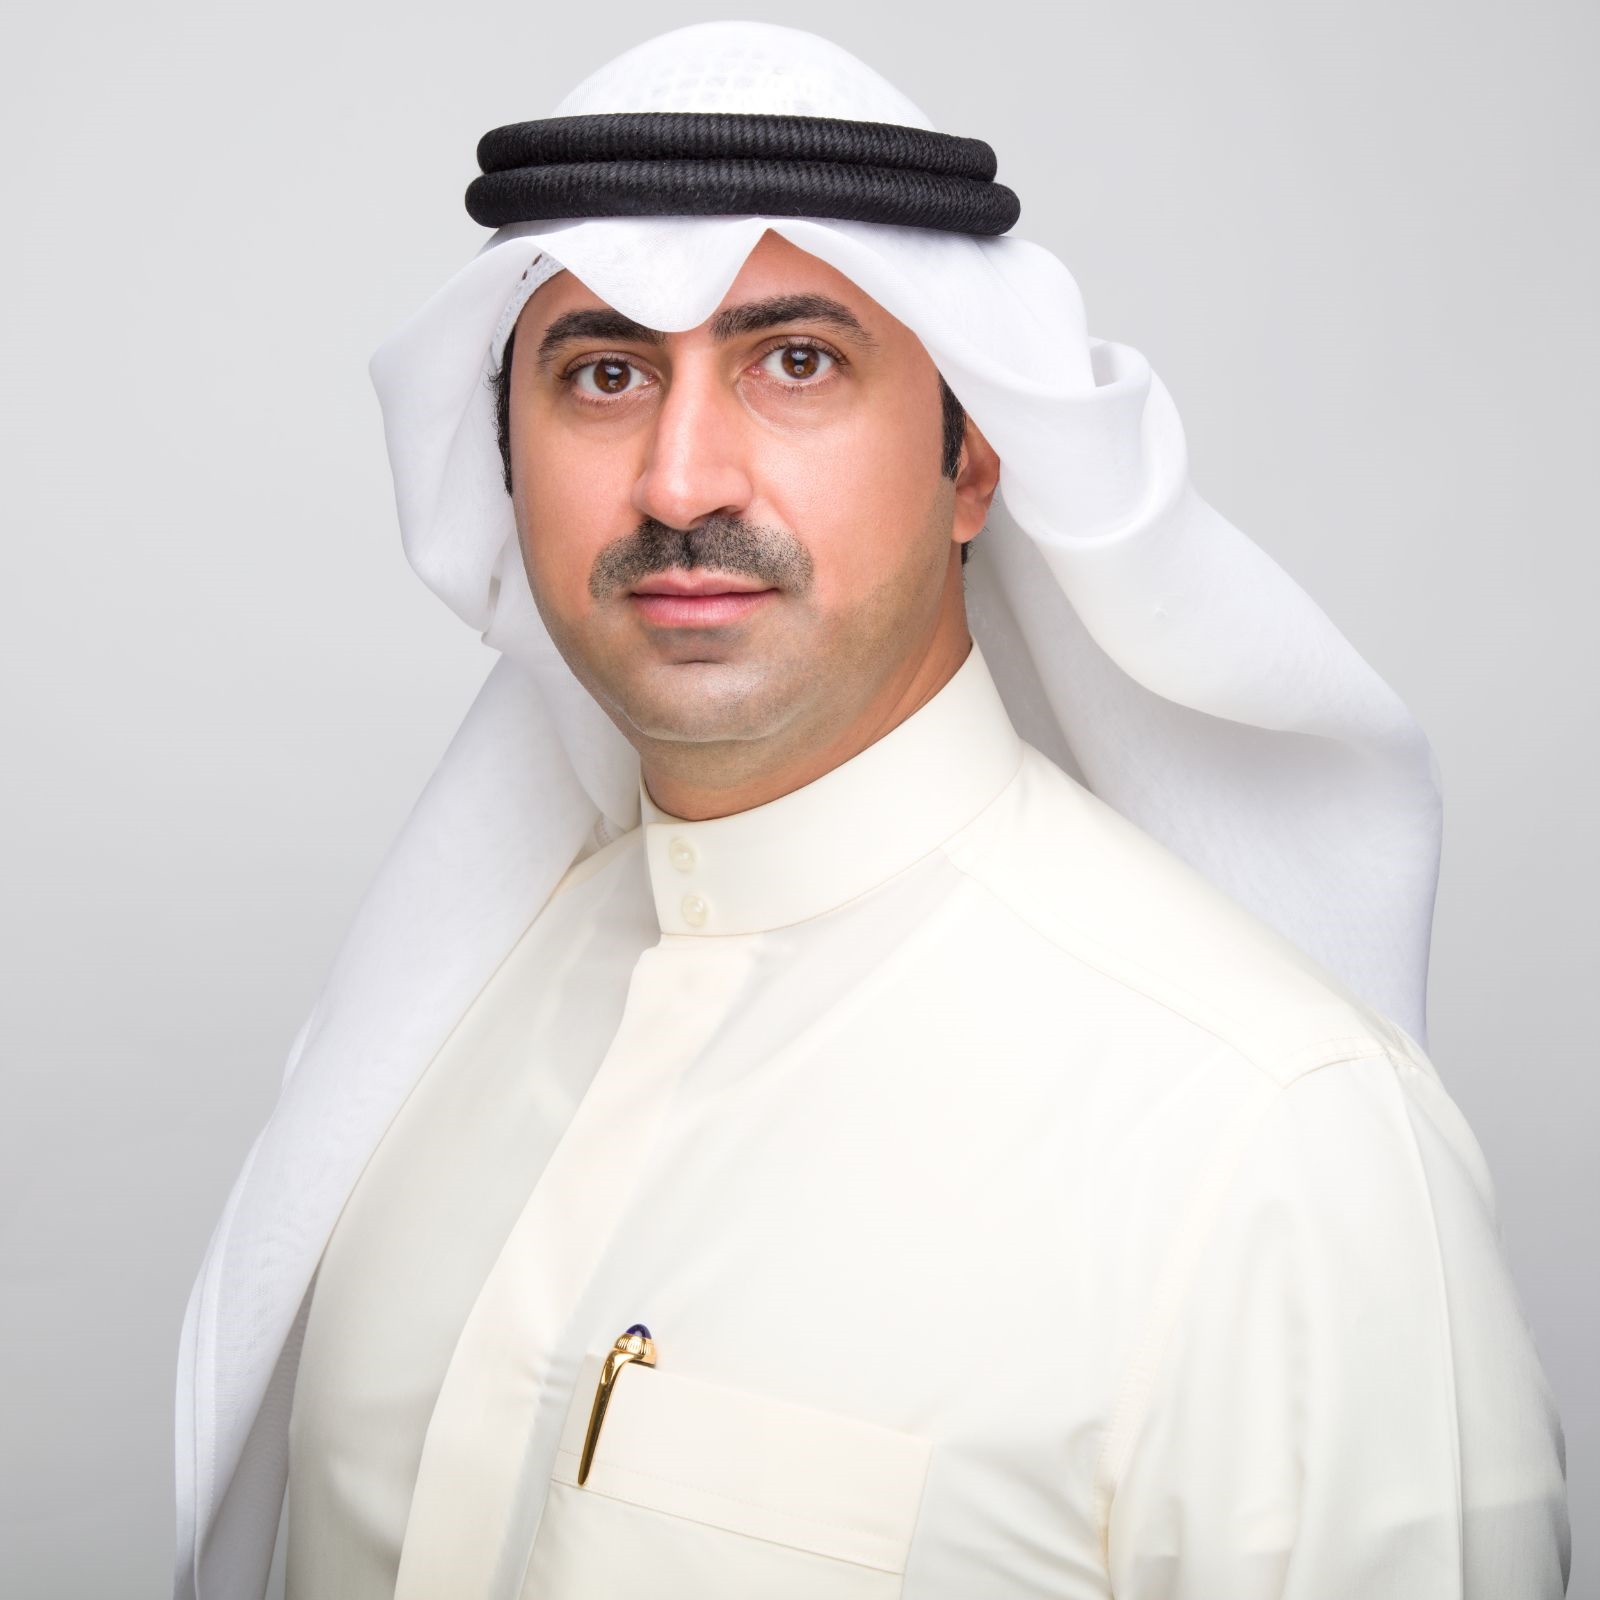 Assistant Undersecretary for International Organizations and Foreign Trade Sheikh Nimr Al-Sabah